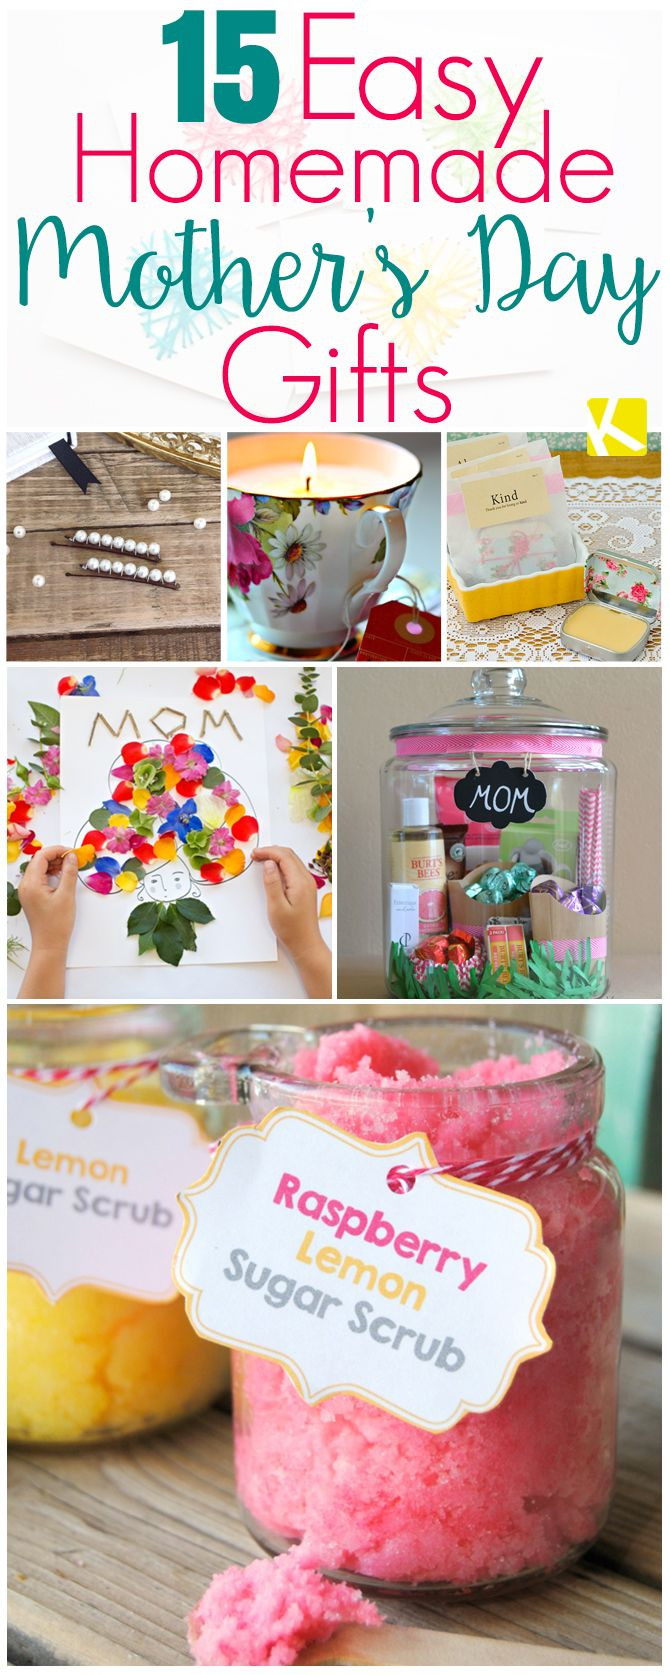 Quick Mothers Day Gifts
 15 Mother’s Day Gifts That Are Ridiculously Easy to Make